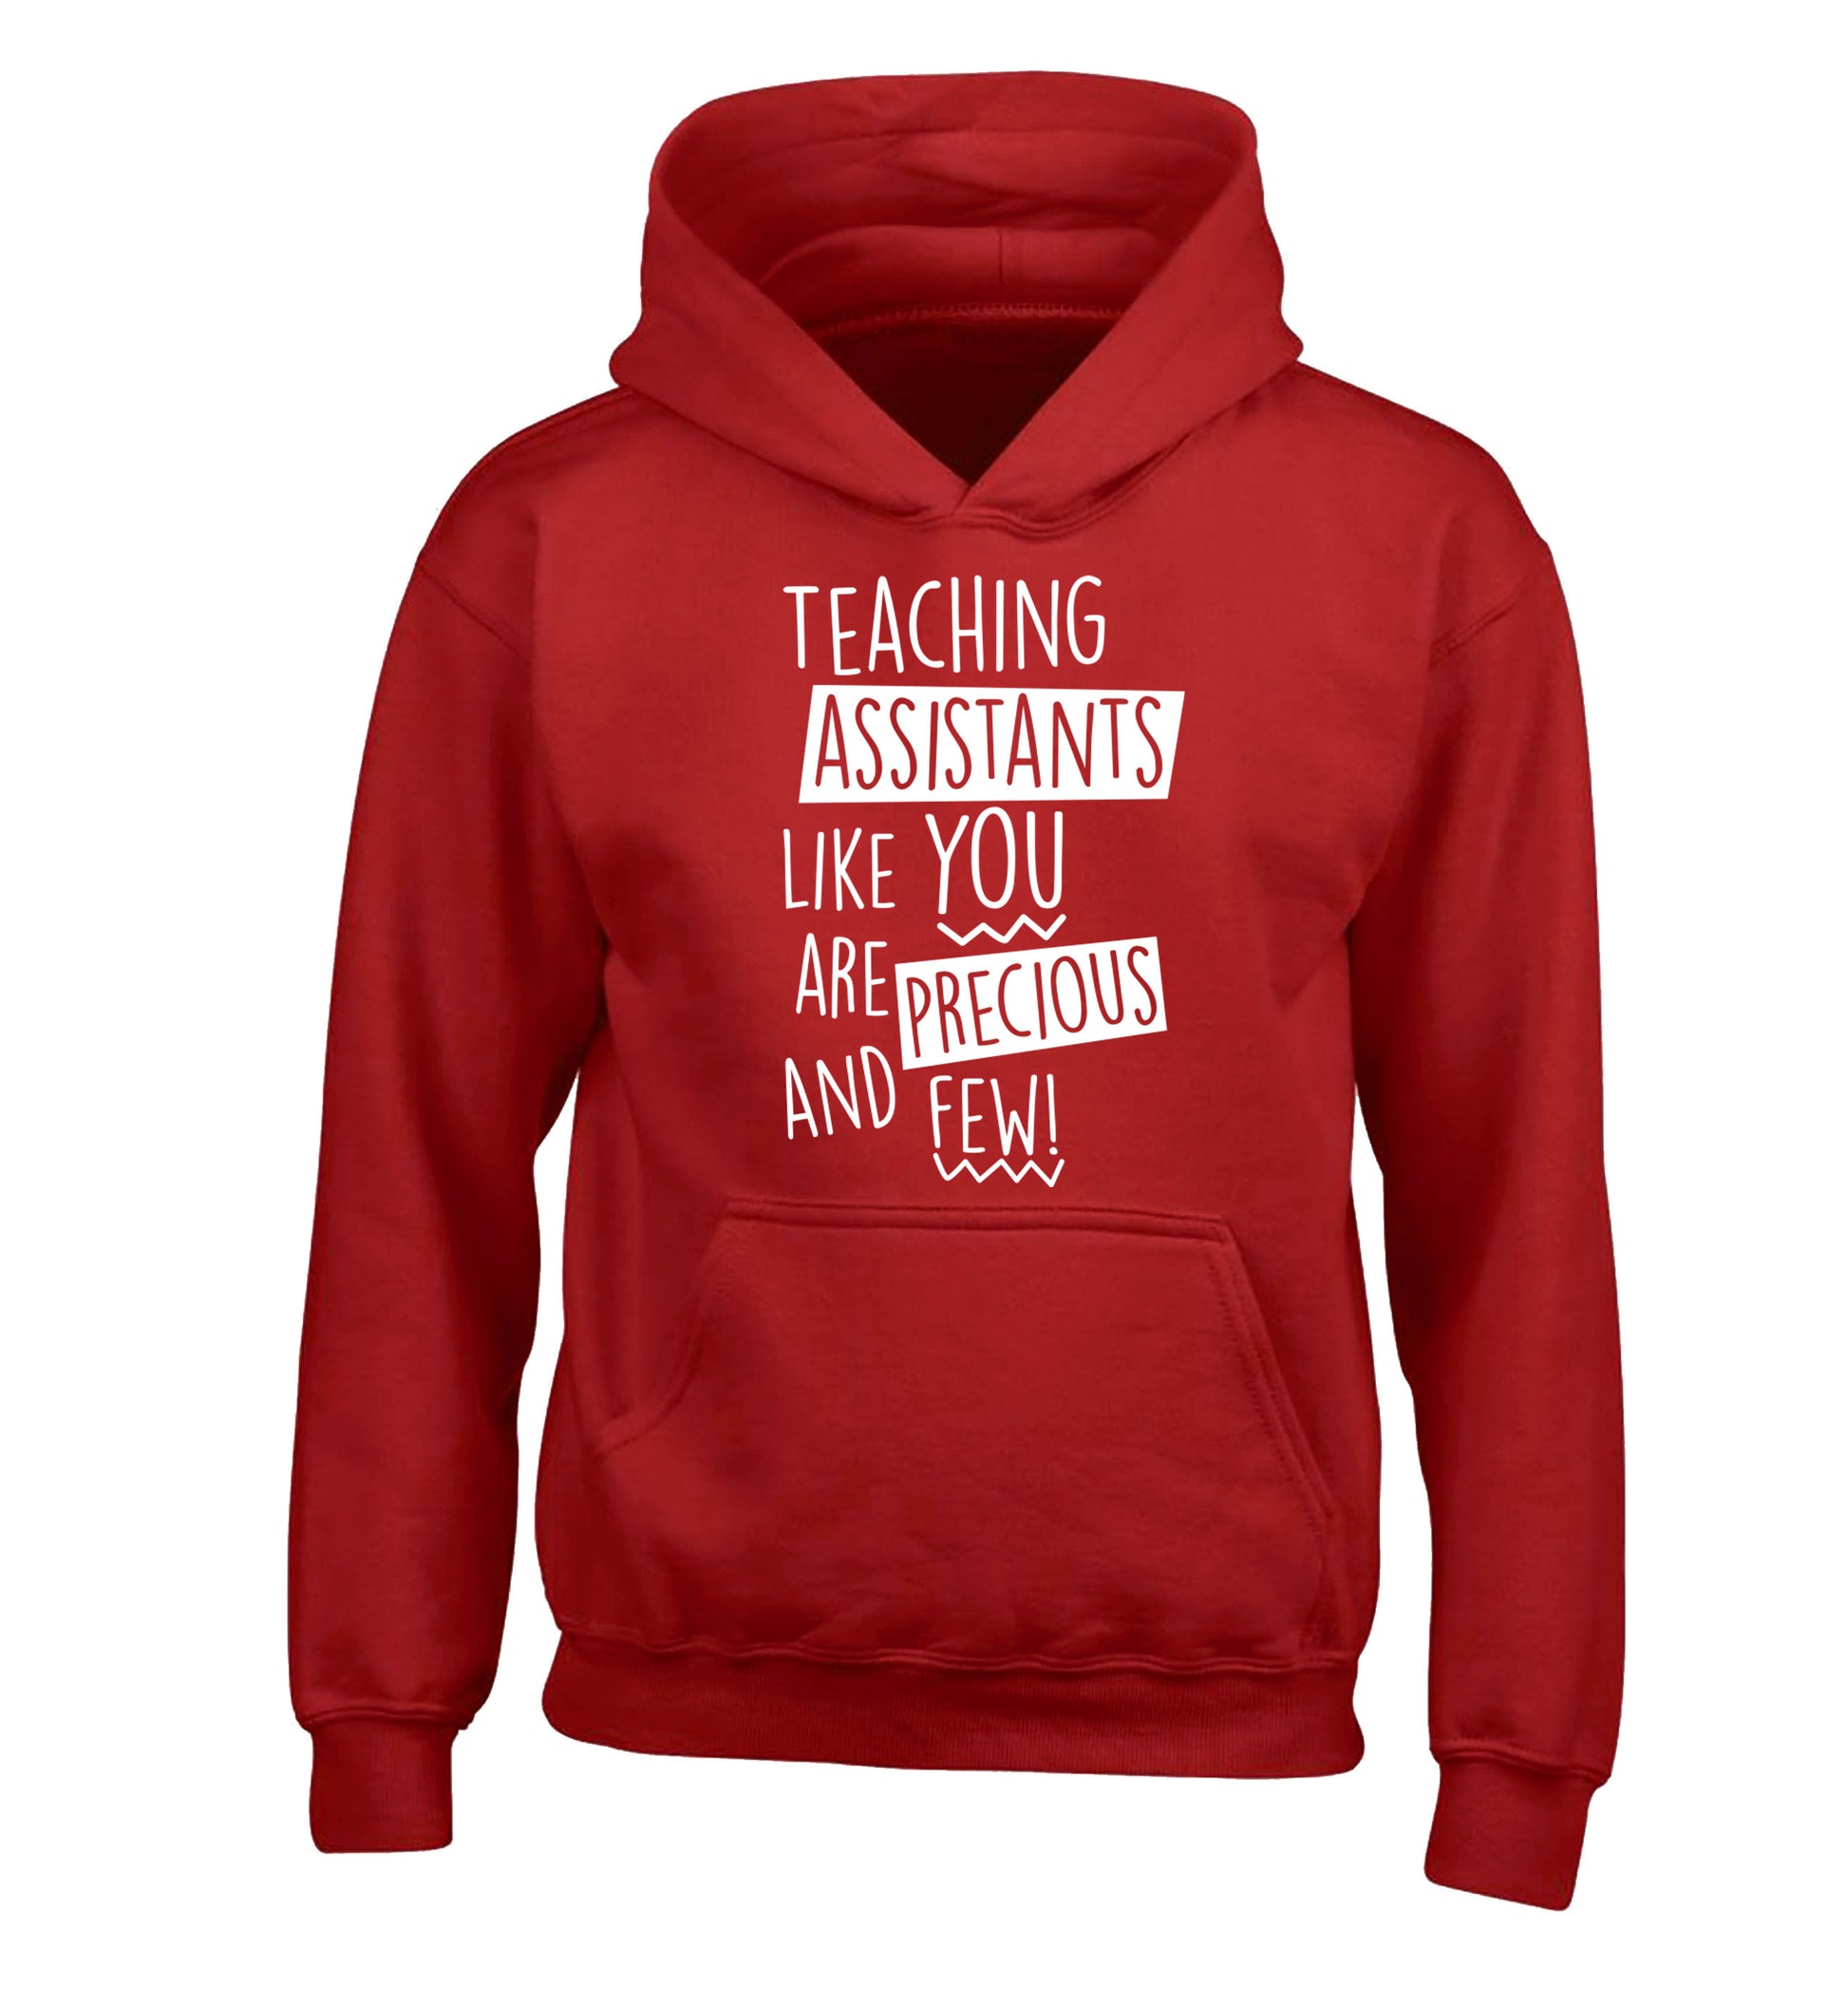 Teaching assistants like you are previous and few! children's red hoodie 12-14 Years